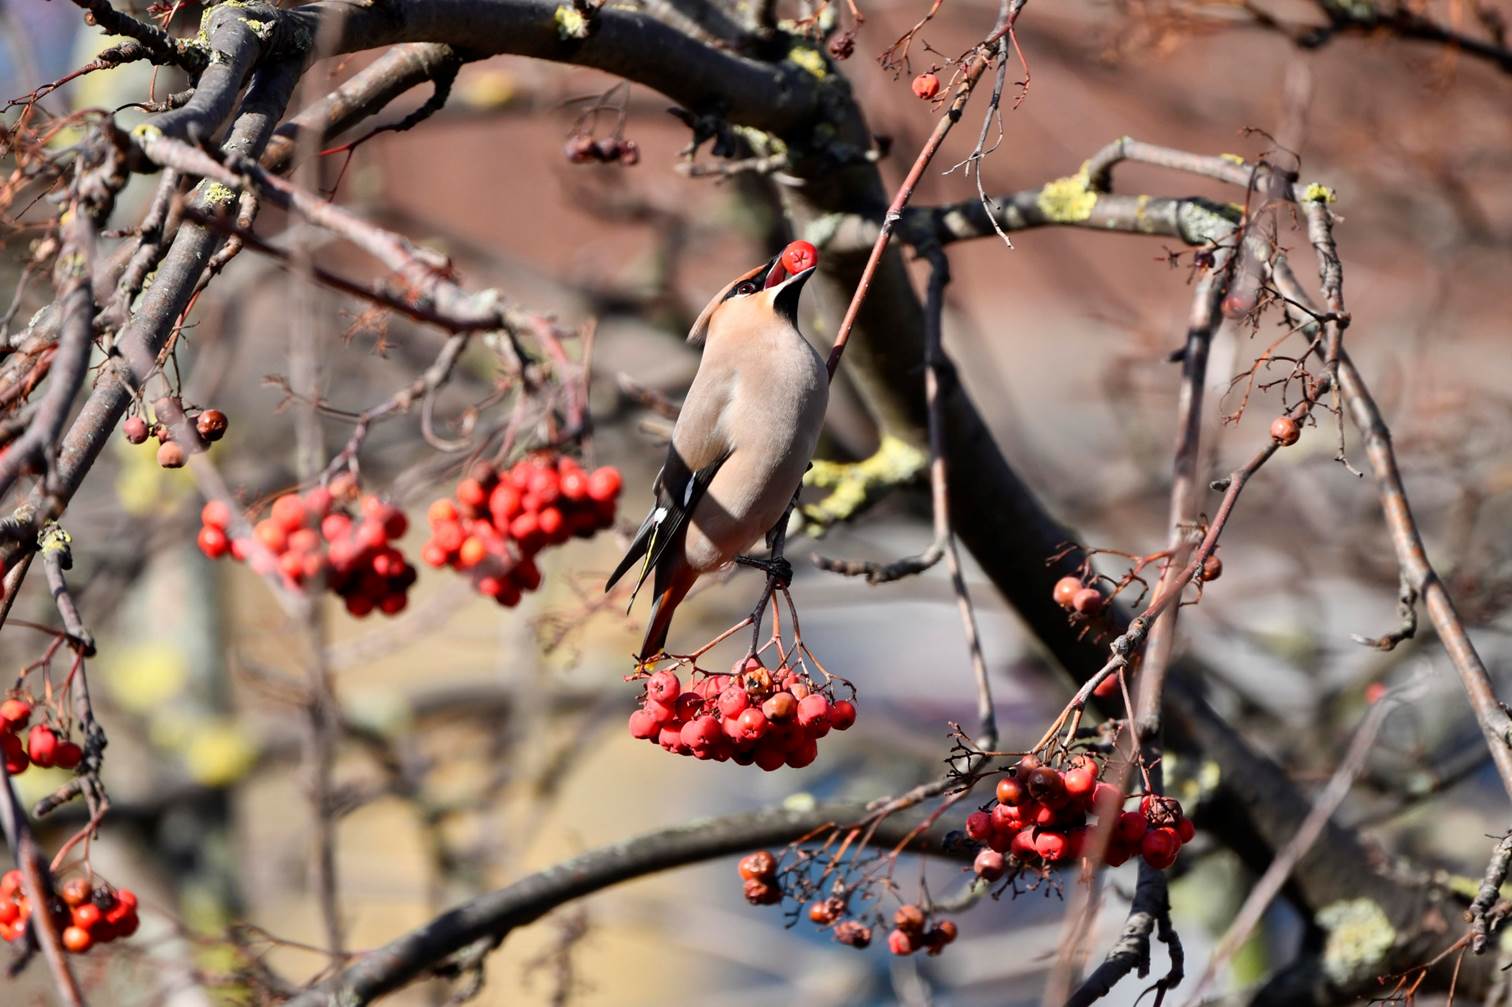 A bird on a branch with berries

Description automatically generated